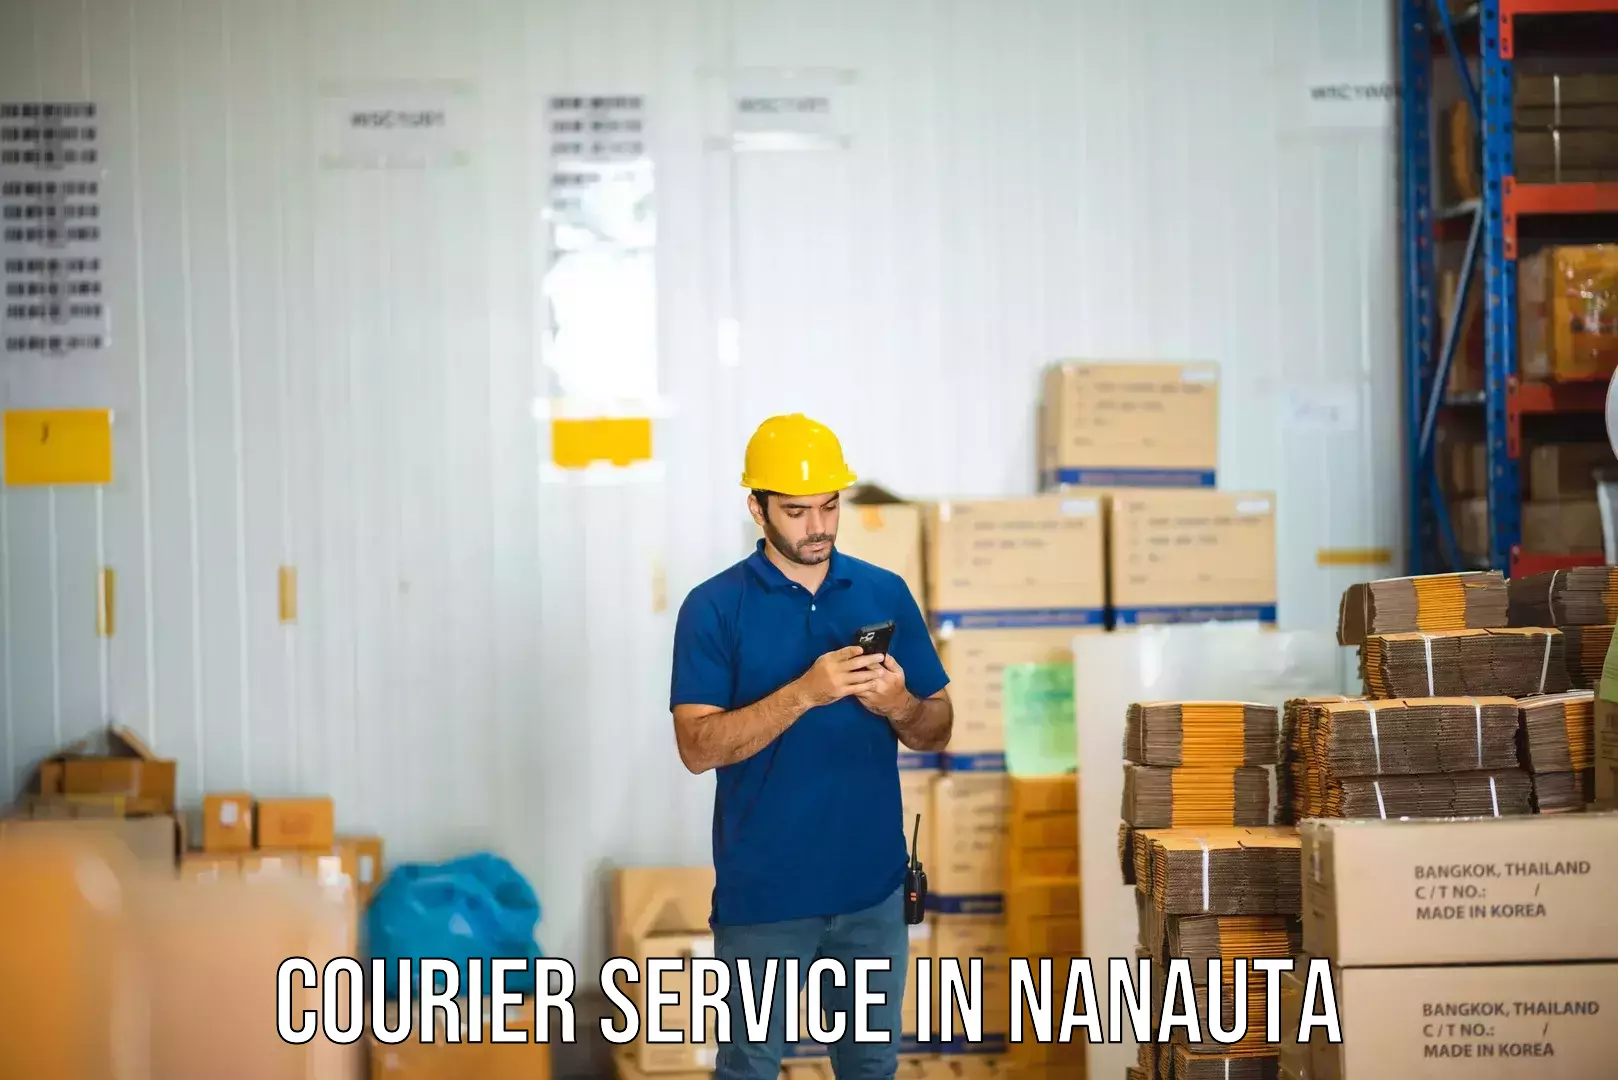 Customer-friendly courier services in Nanauta